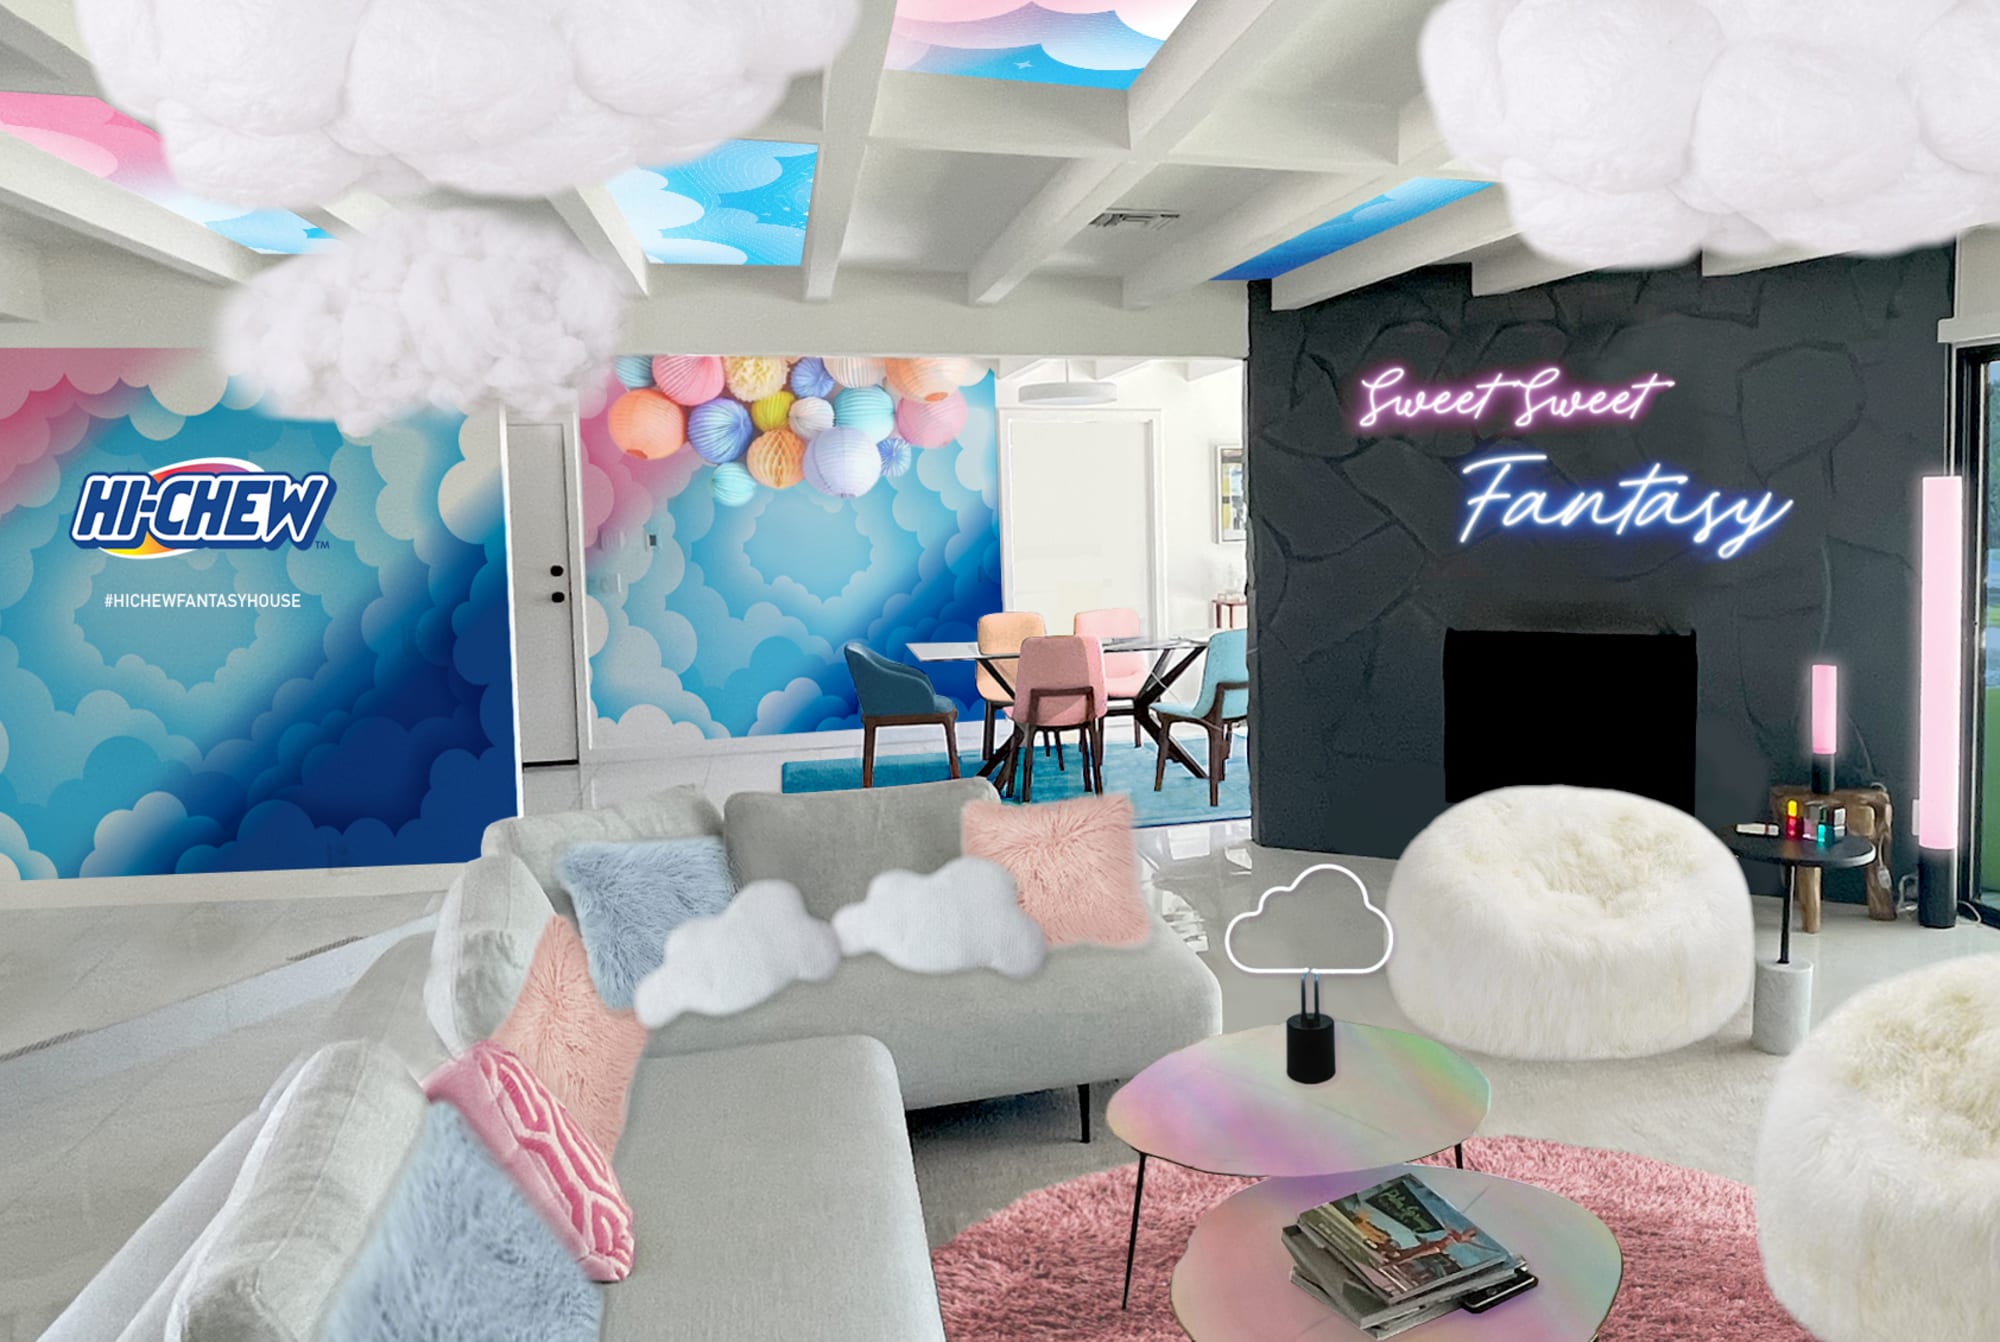 Hi-CHEW wants you to win a dream weekend at a Fantasy House